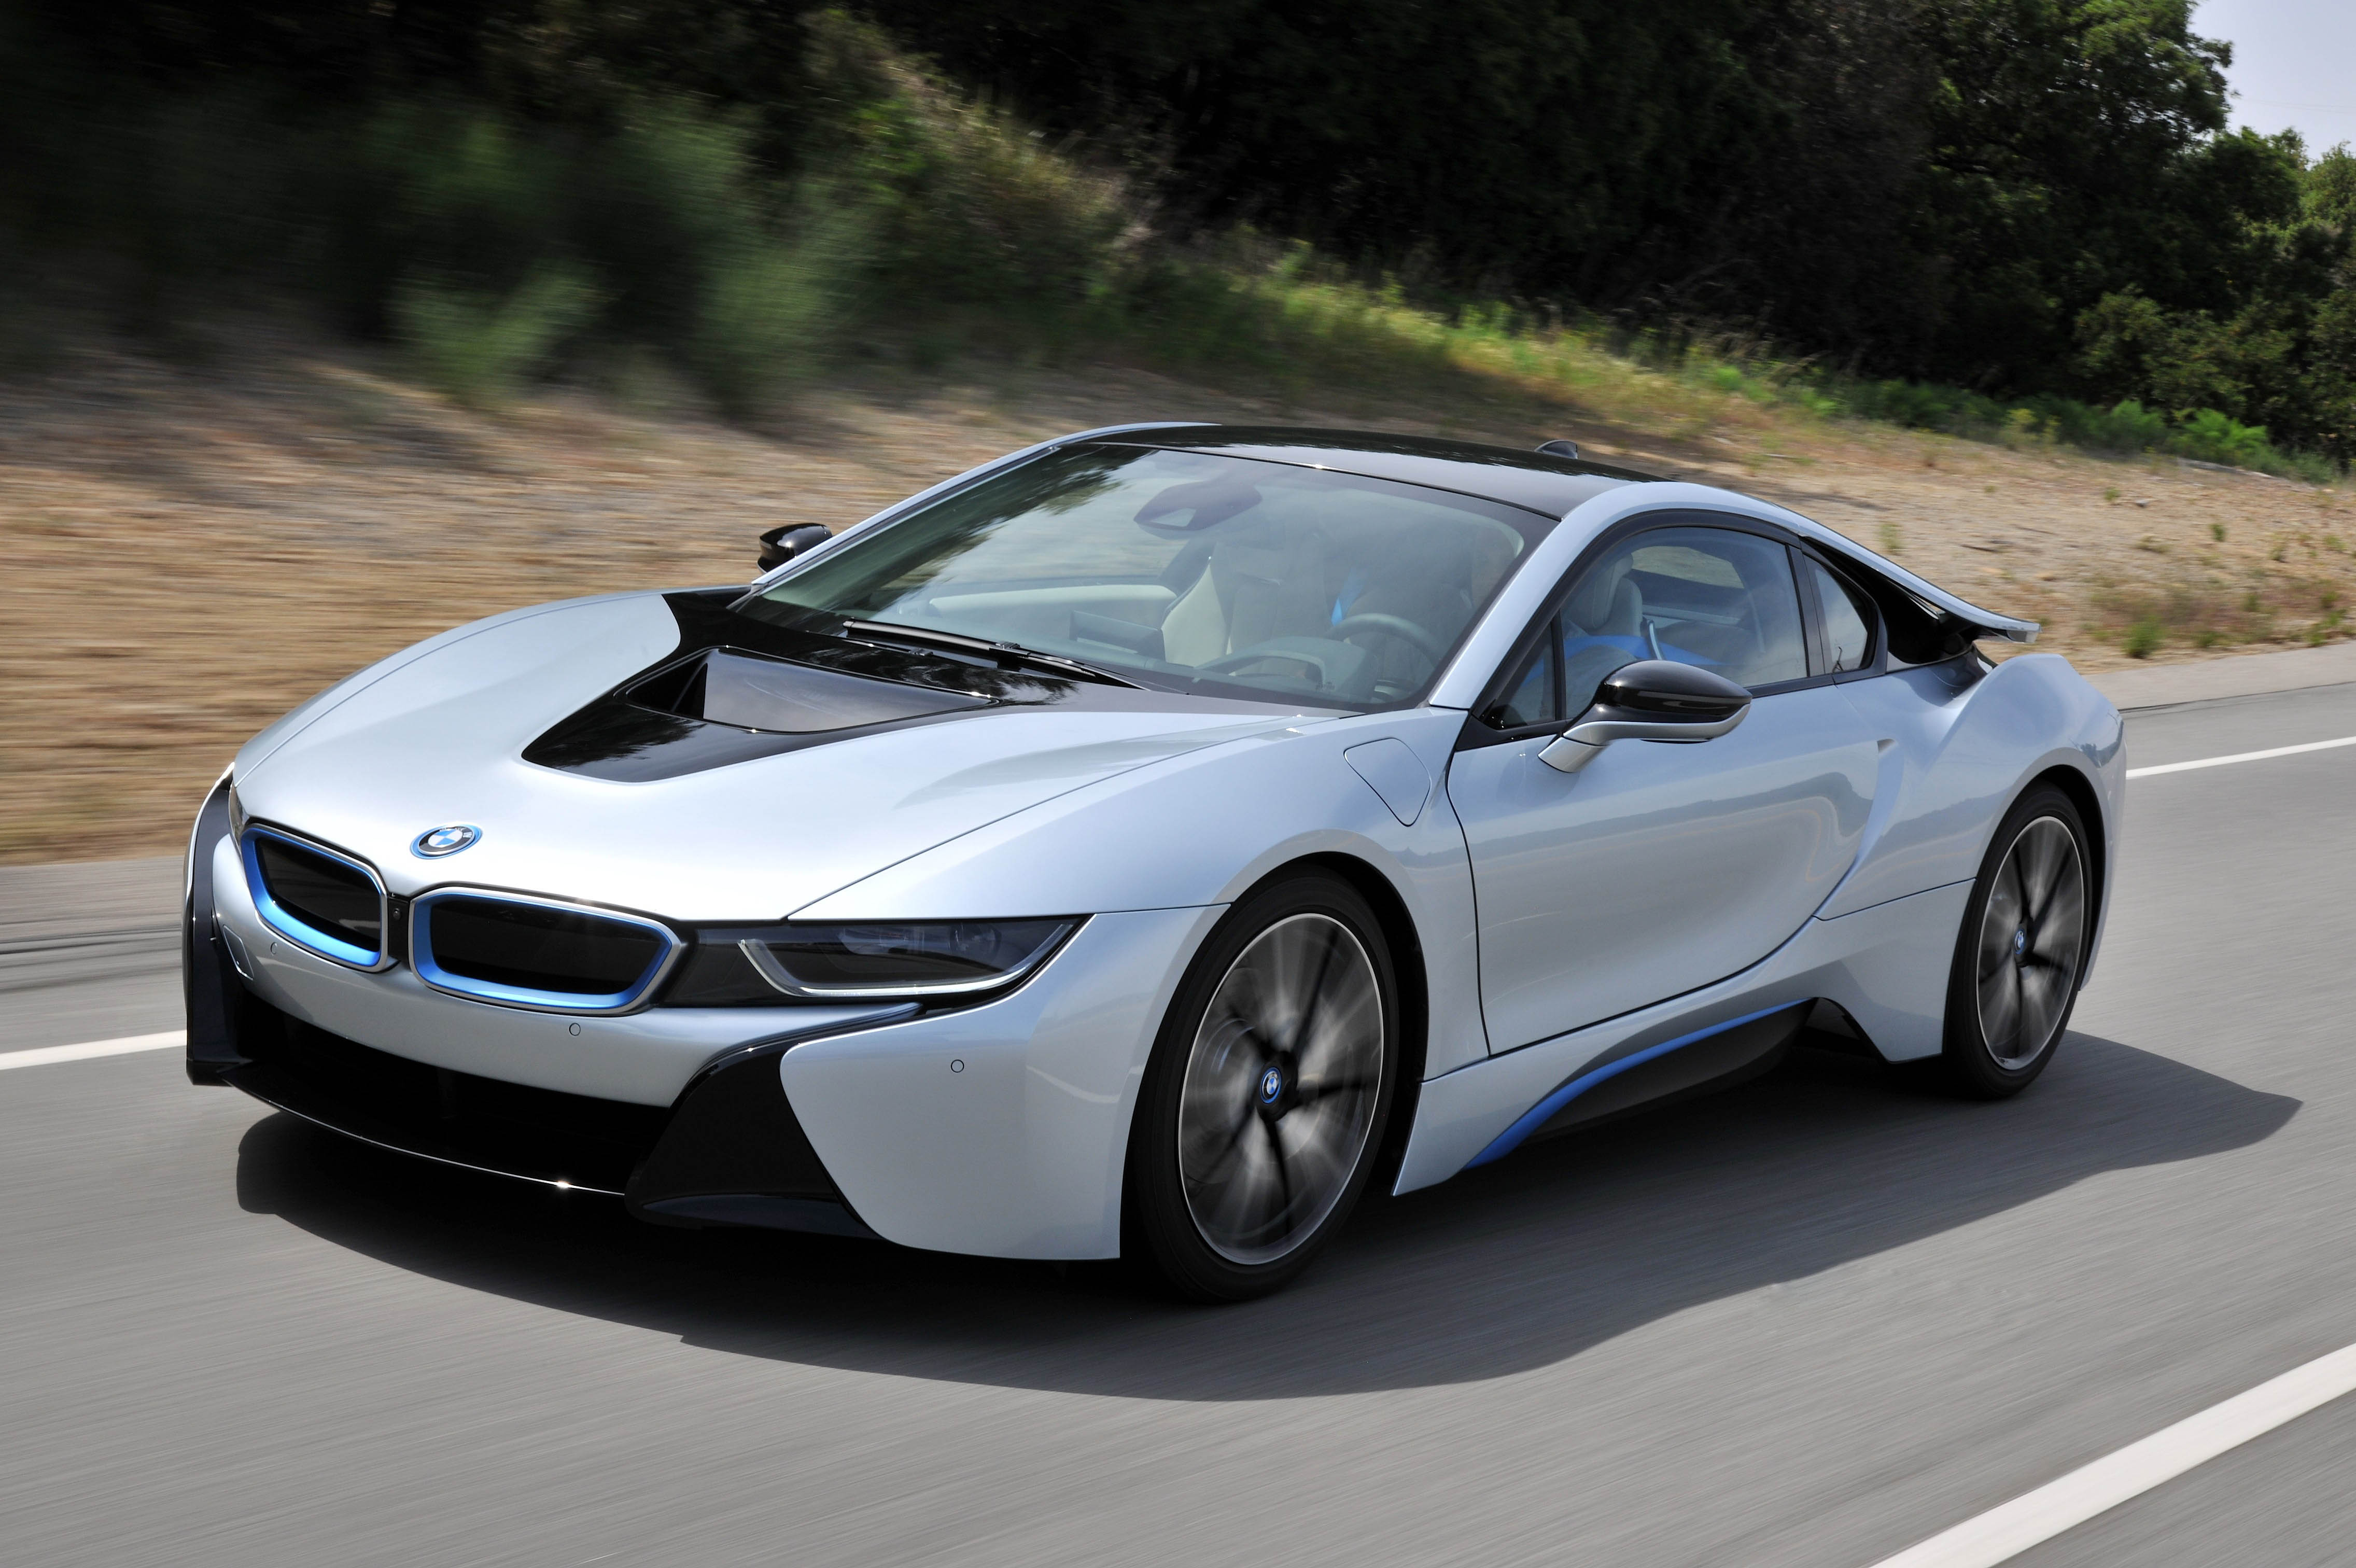 Bmw I8 - BMW I8 - Whelo Lifestyle / Bmw assist is also included ...